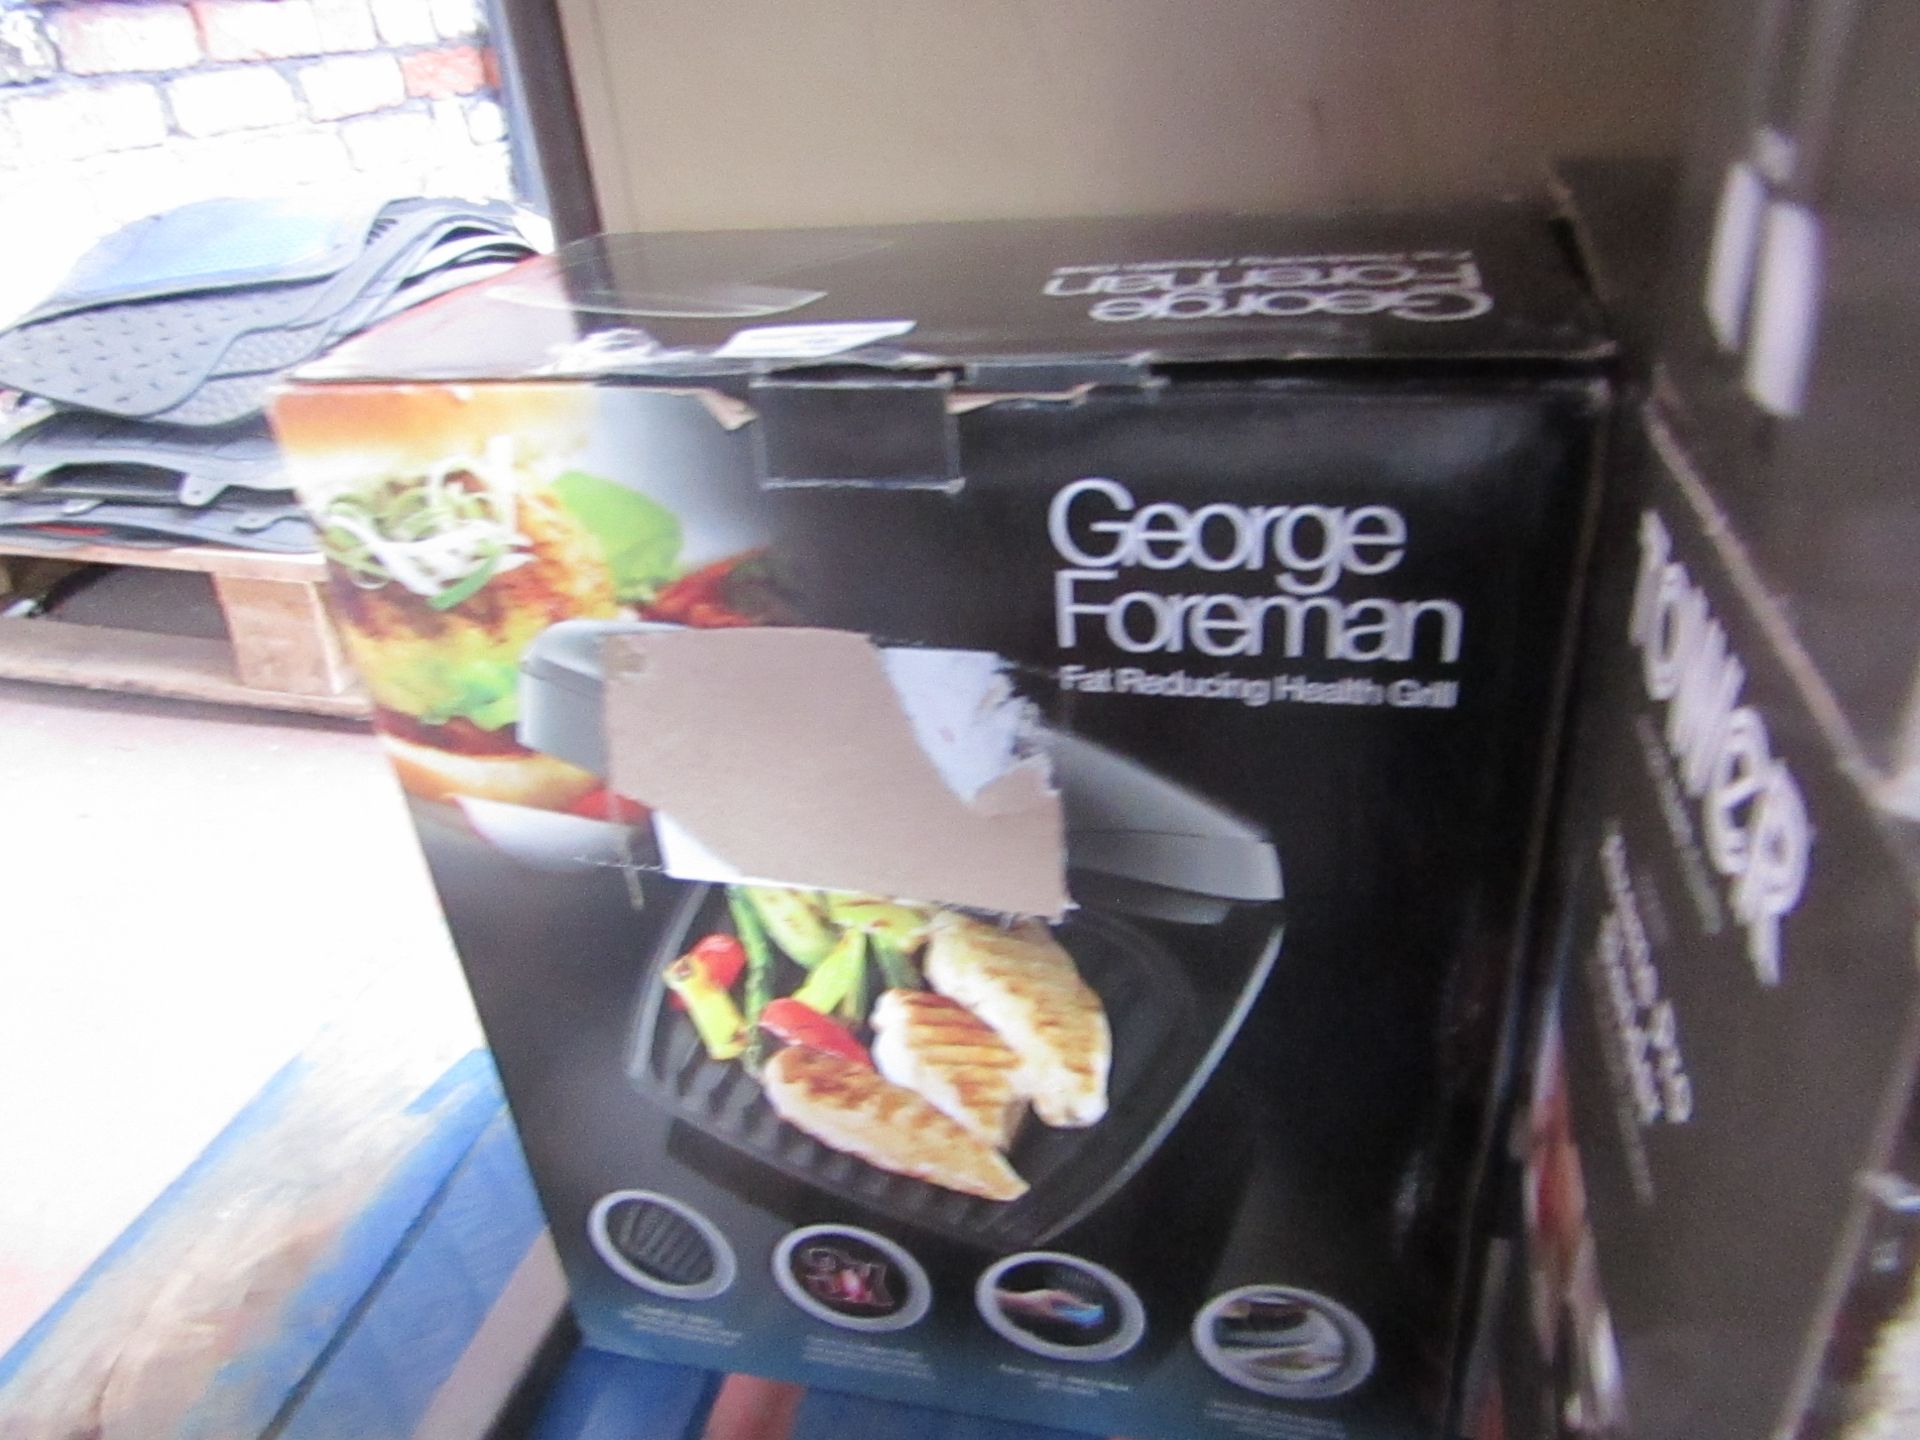 georgre foreman fat reducing health grill untested and boxed